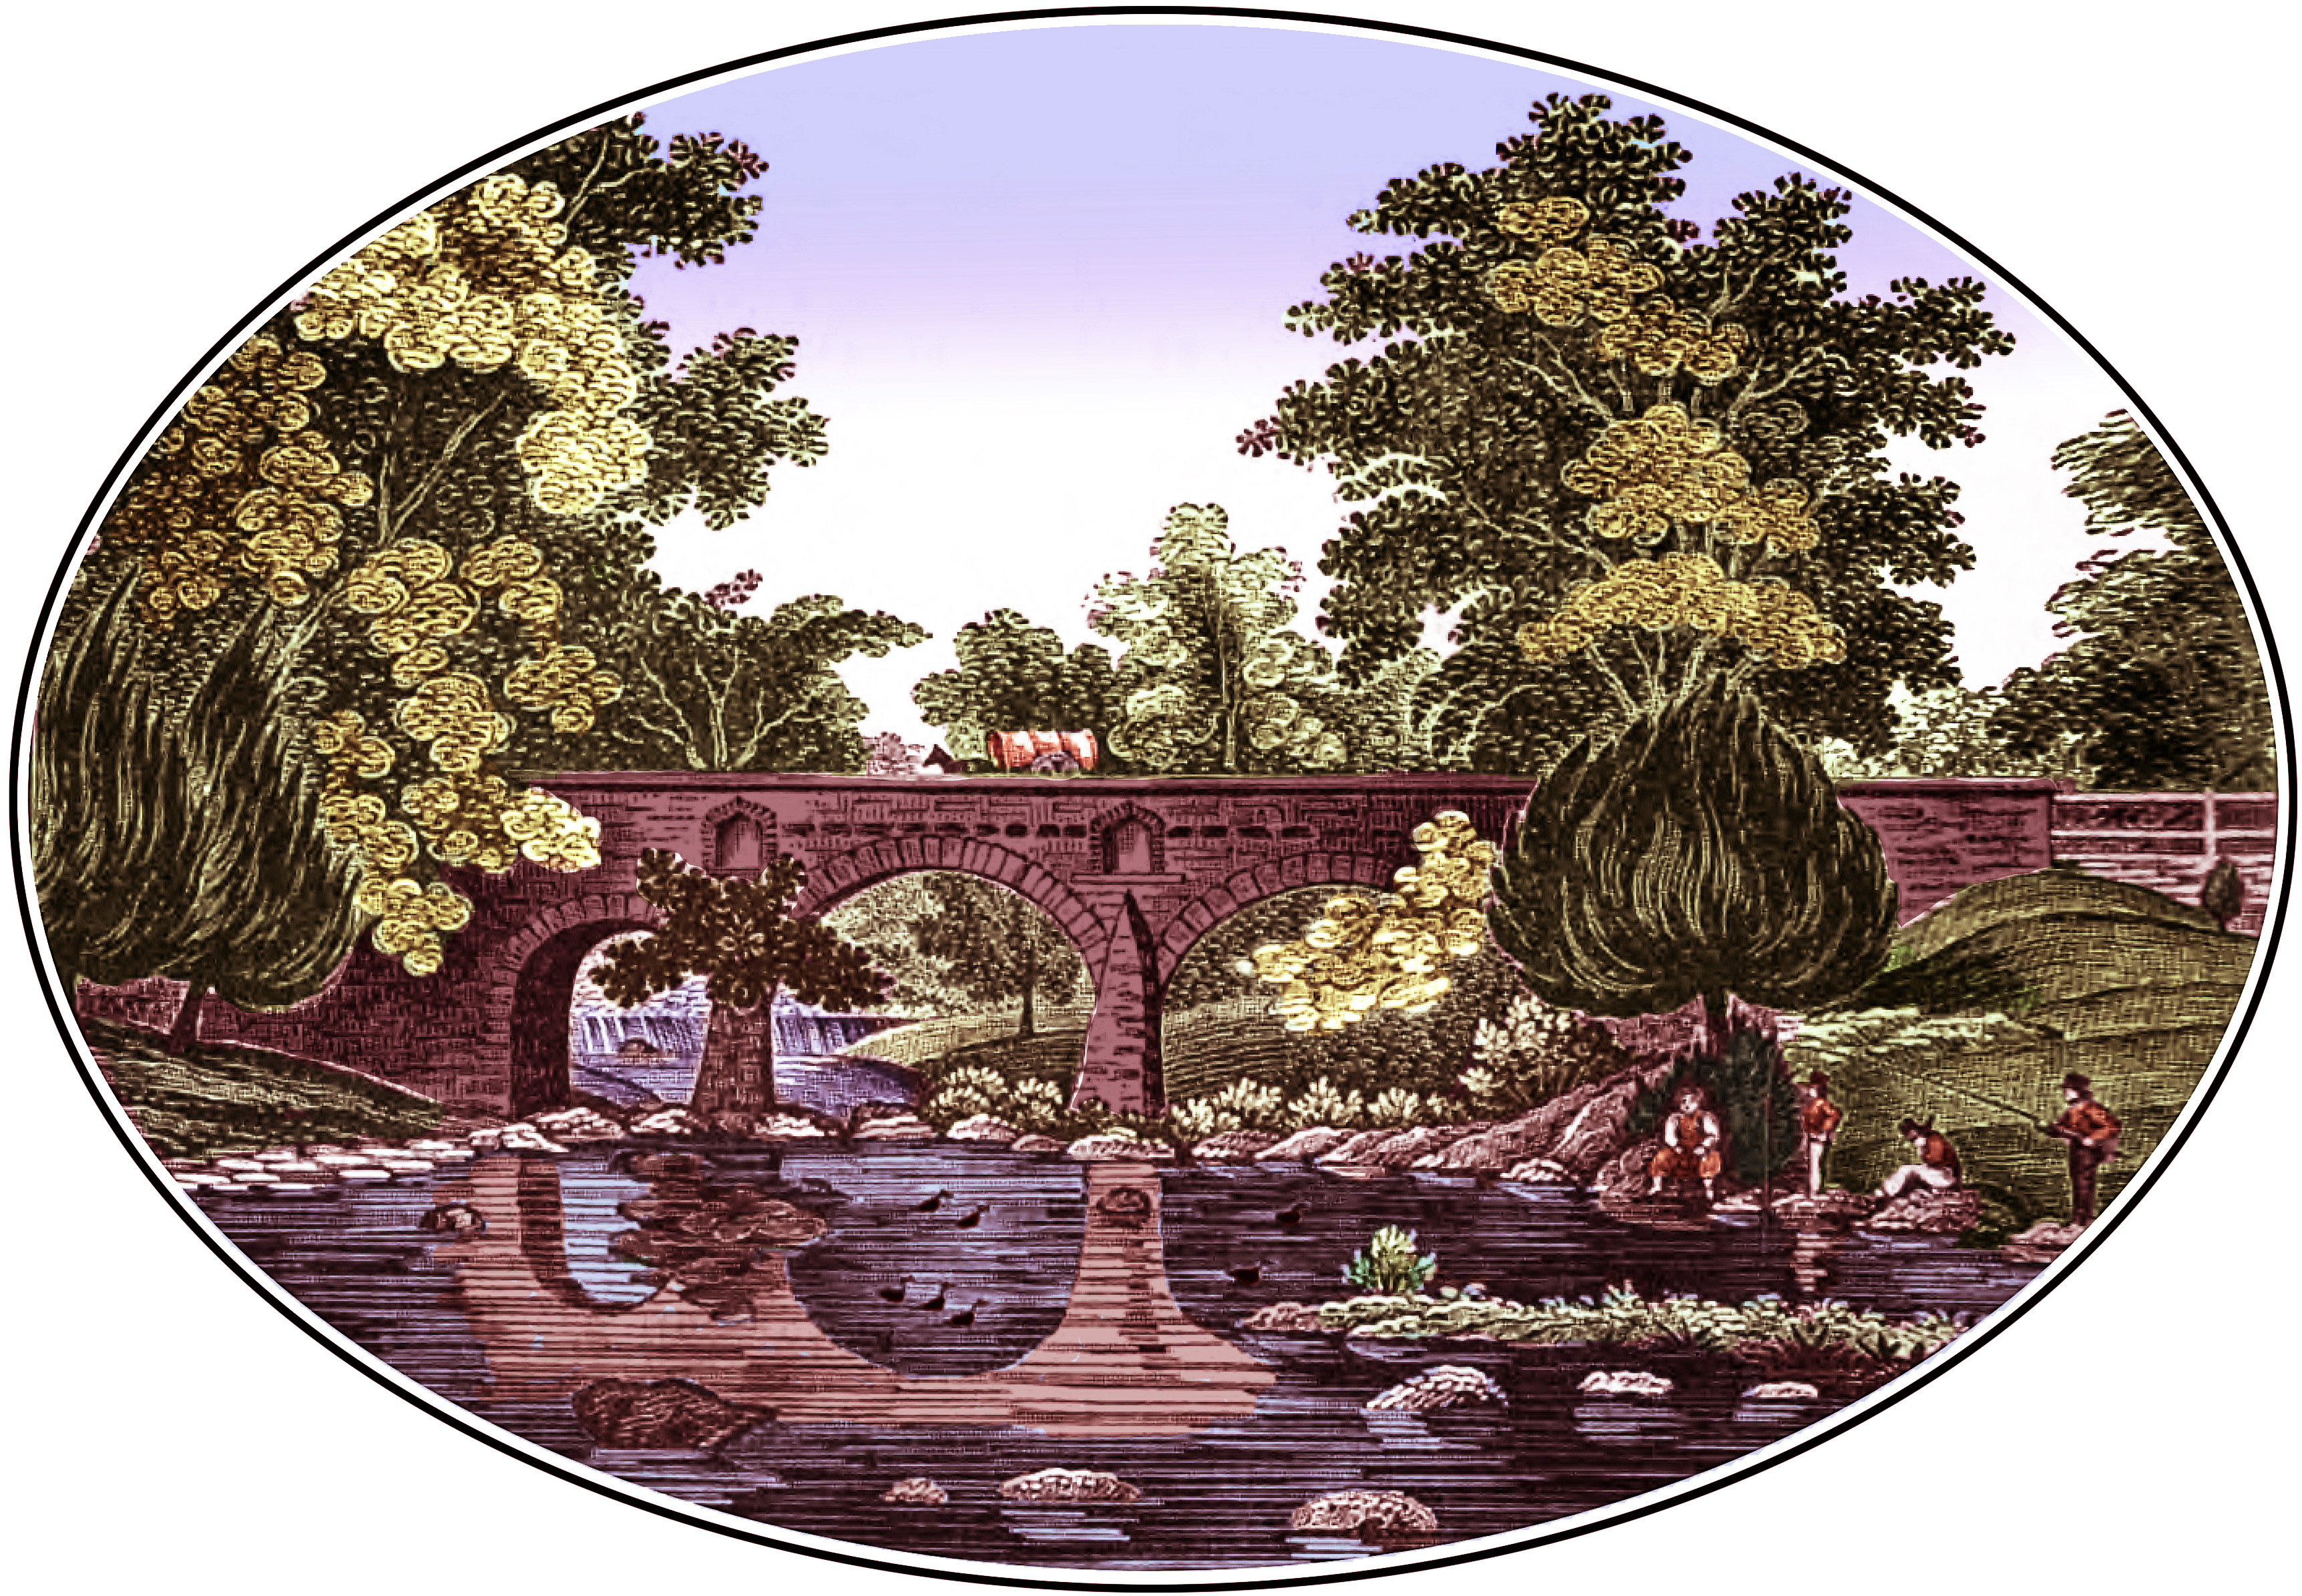 A drawing of the Pennypack Creek Bridge by William L. Breton, circa 1830.  